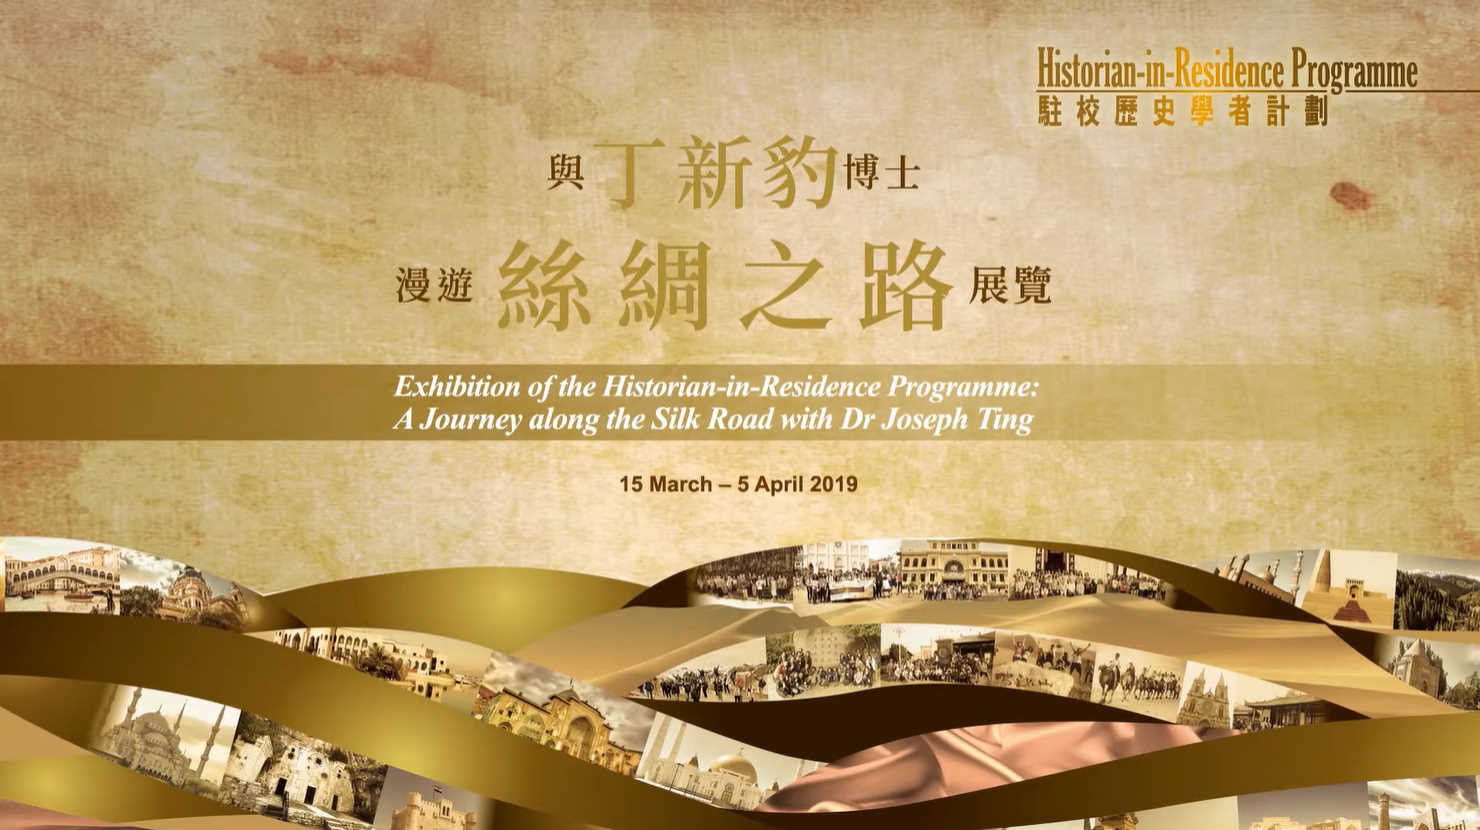 Exhibition of the Historian-in-Residence Programme: A Journey along the Silk Road with Dr Joseph Ting